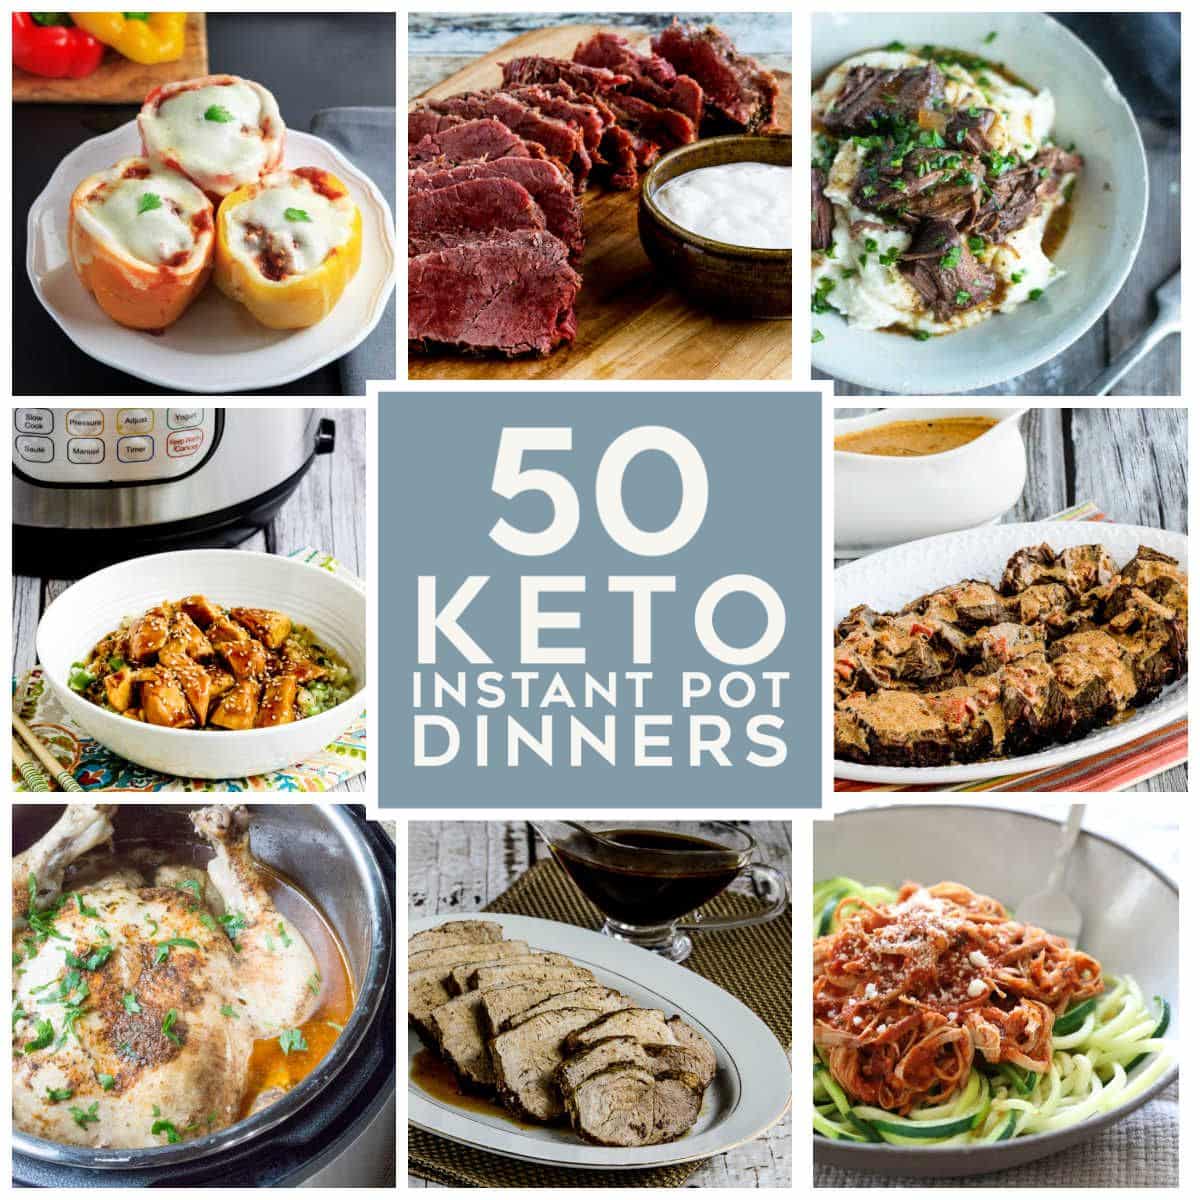 50 Keto Instant Pot Dinners collage of featured recipes with text overlay